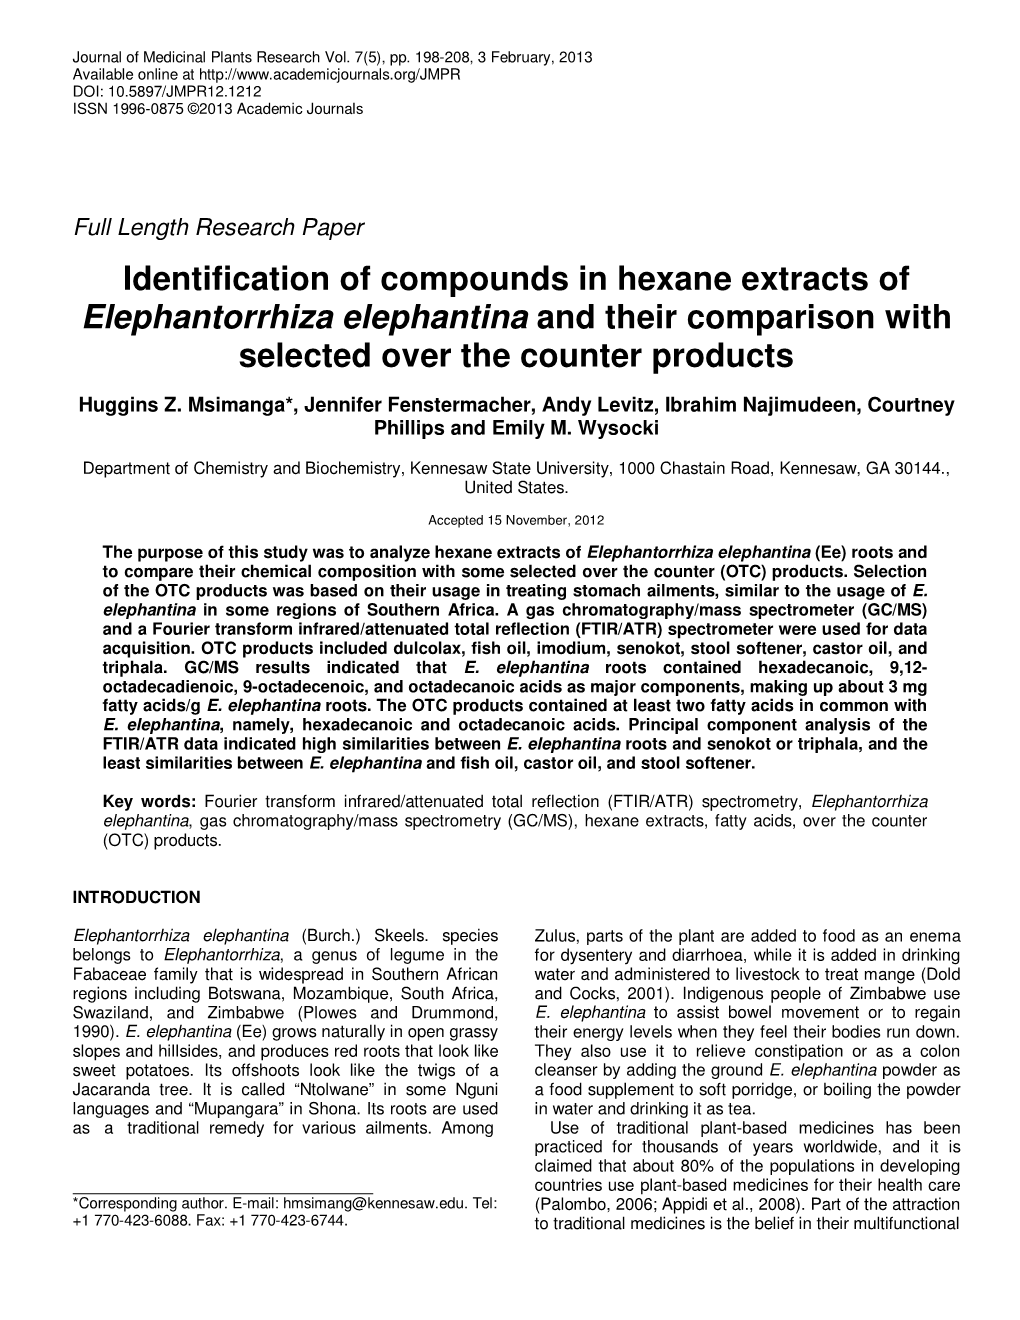 Identification of Compounds in Hexane Extracts of Elephantorrhiza Elephantina and Their Comparison with Selected Over the Counter Products